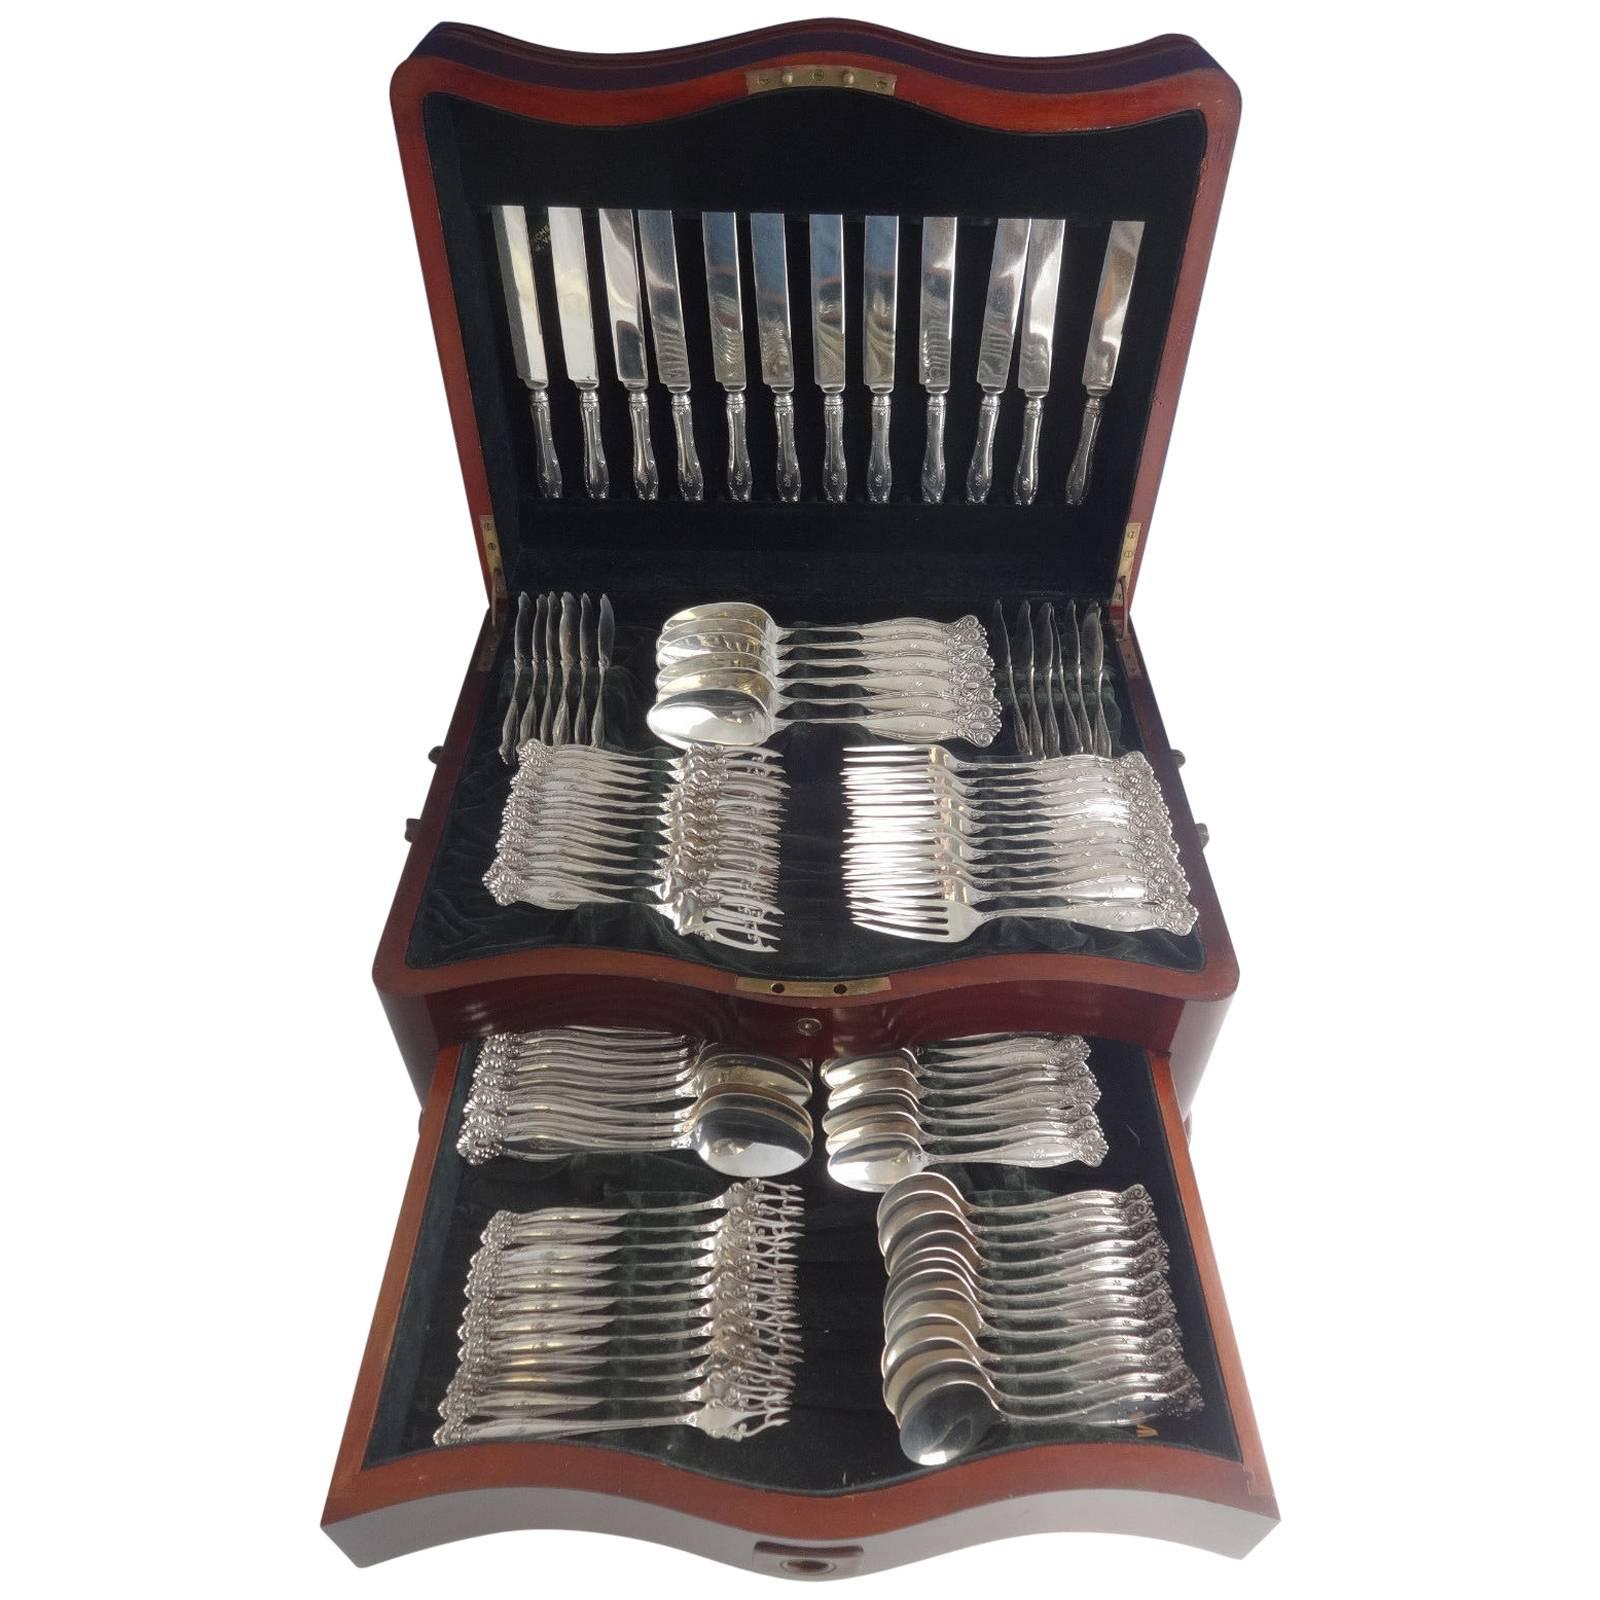 Fabulous Empire by Towle sterling silver flatware set, 102 pieces. This set includes:

12 knives, 8 3/4